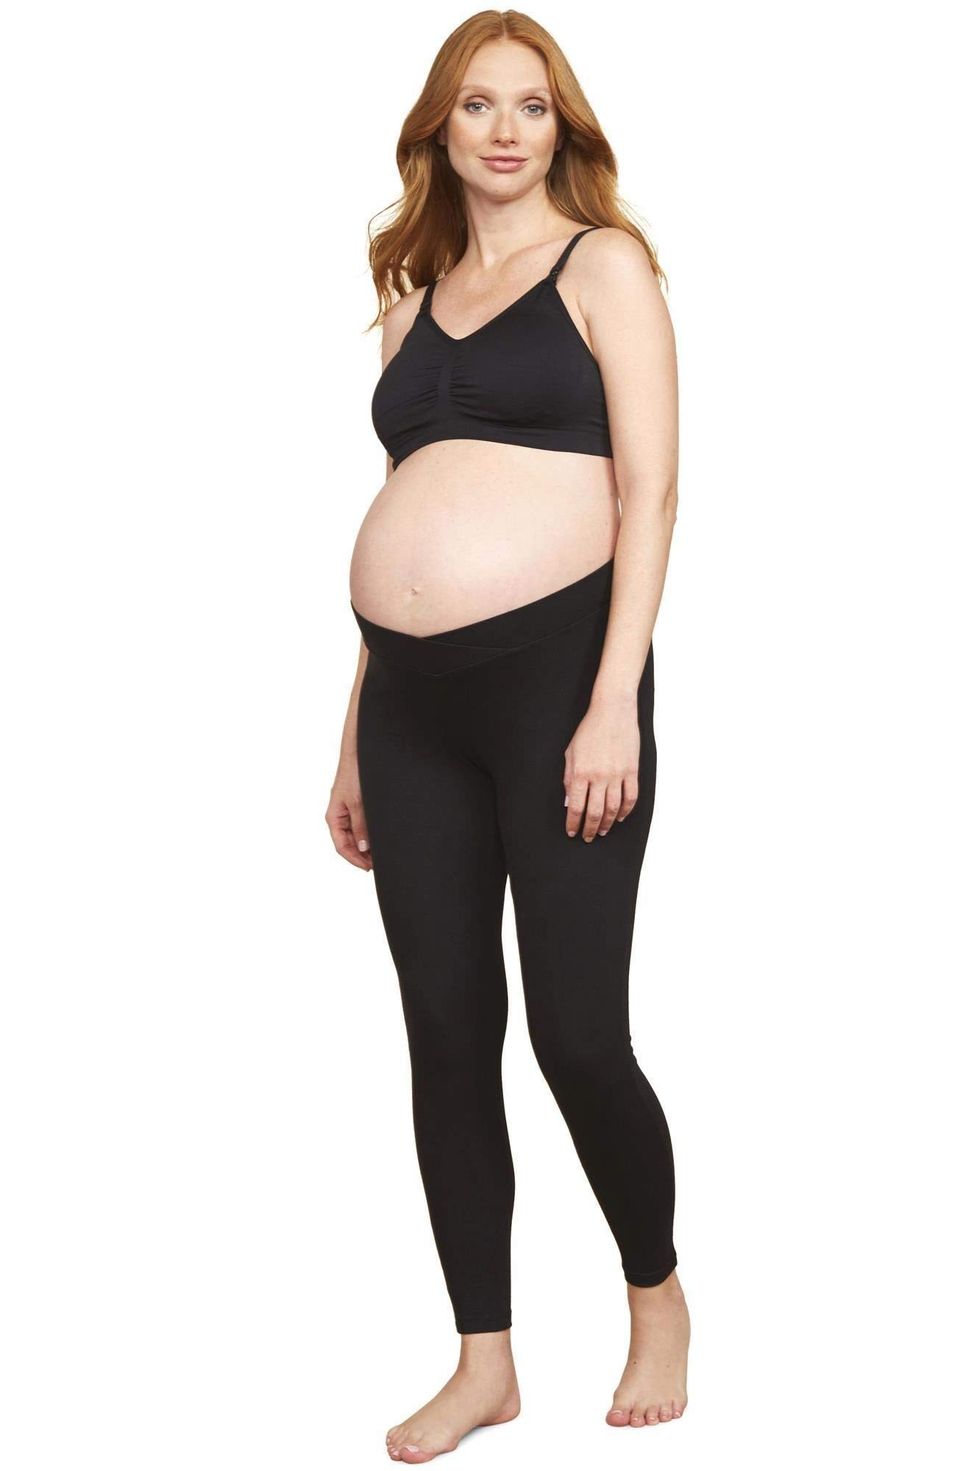  Foucome 3 Pack Womens Maternity Leggings Over The Belly  Pregnancy Yoga Pants Active Wear Workout Leggings